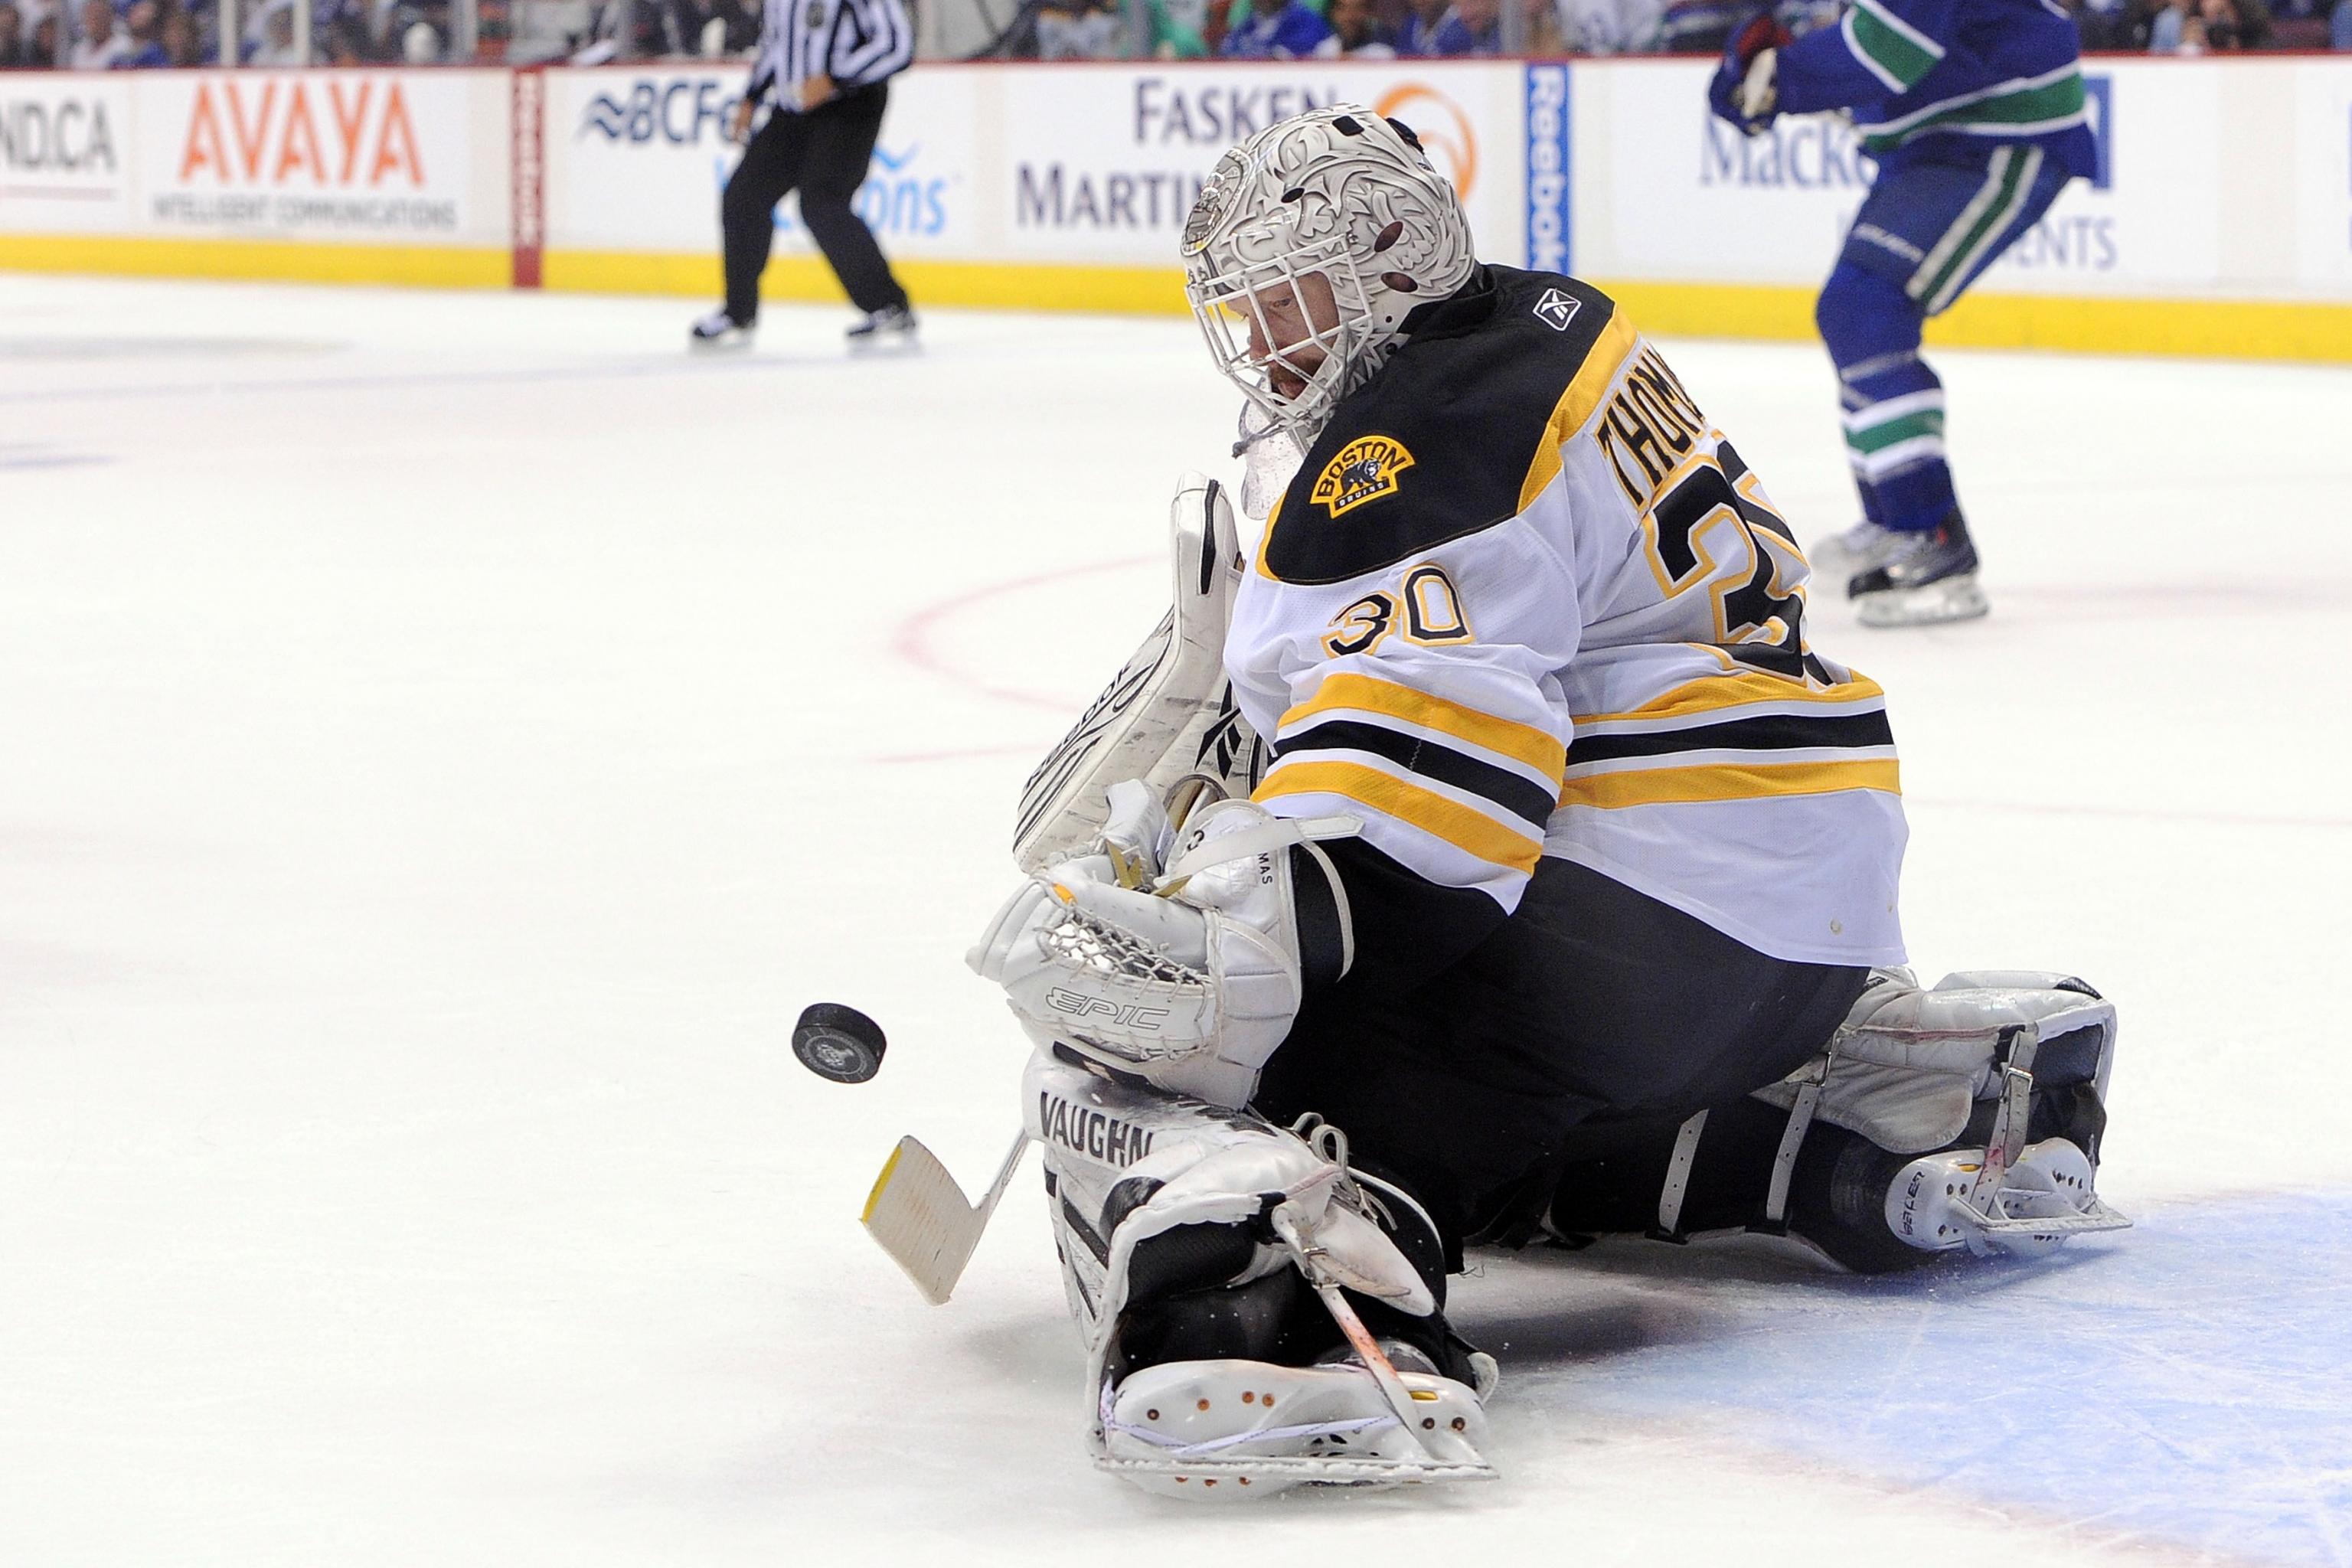 Bruins goalie, Tiny Thompson, stops shot in action around the net